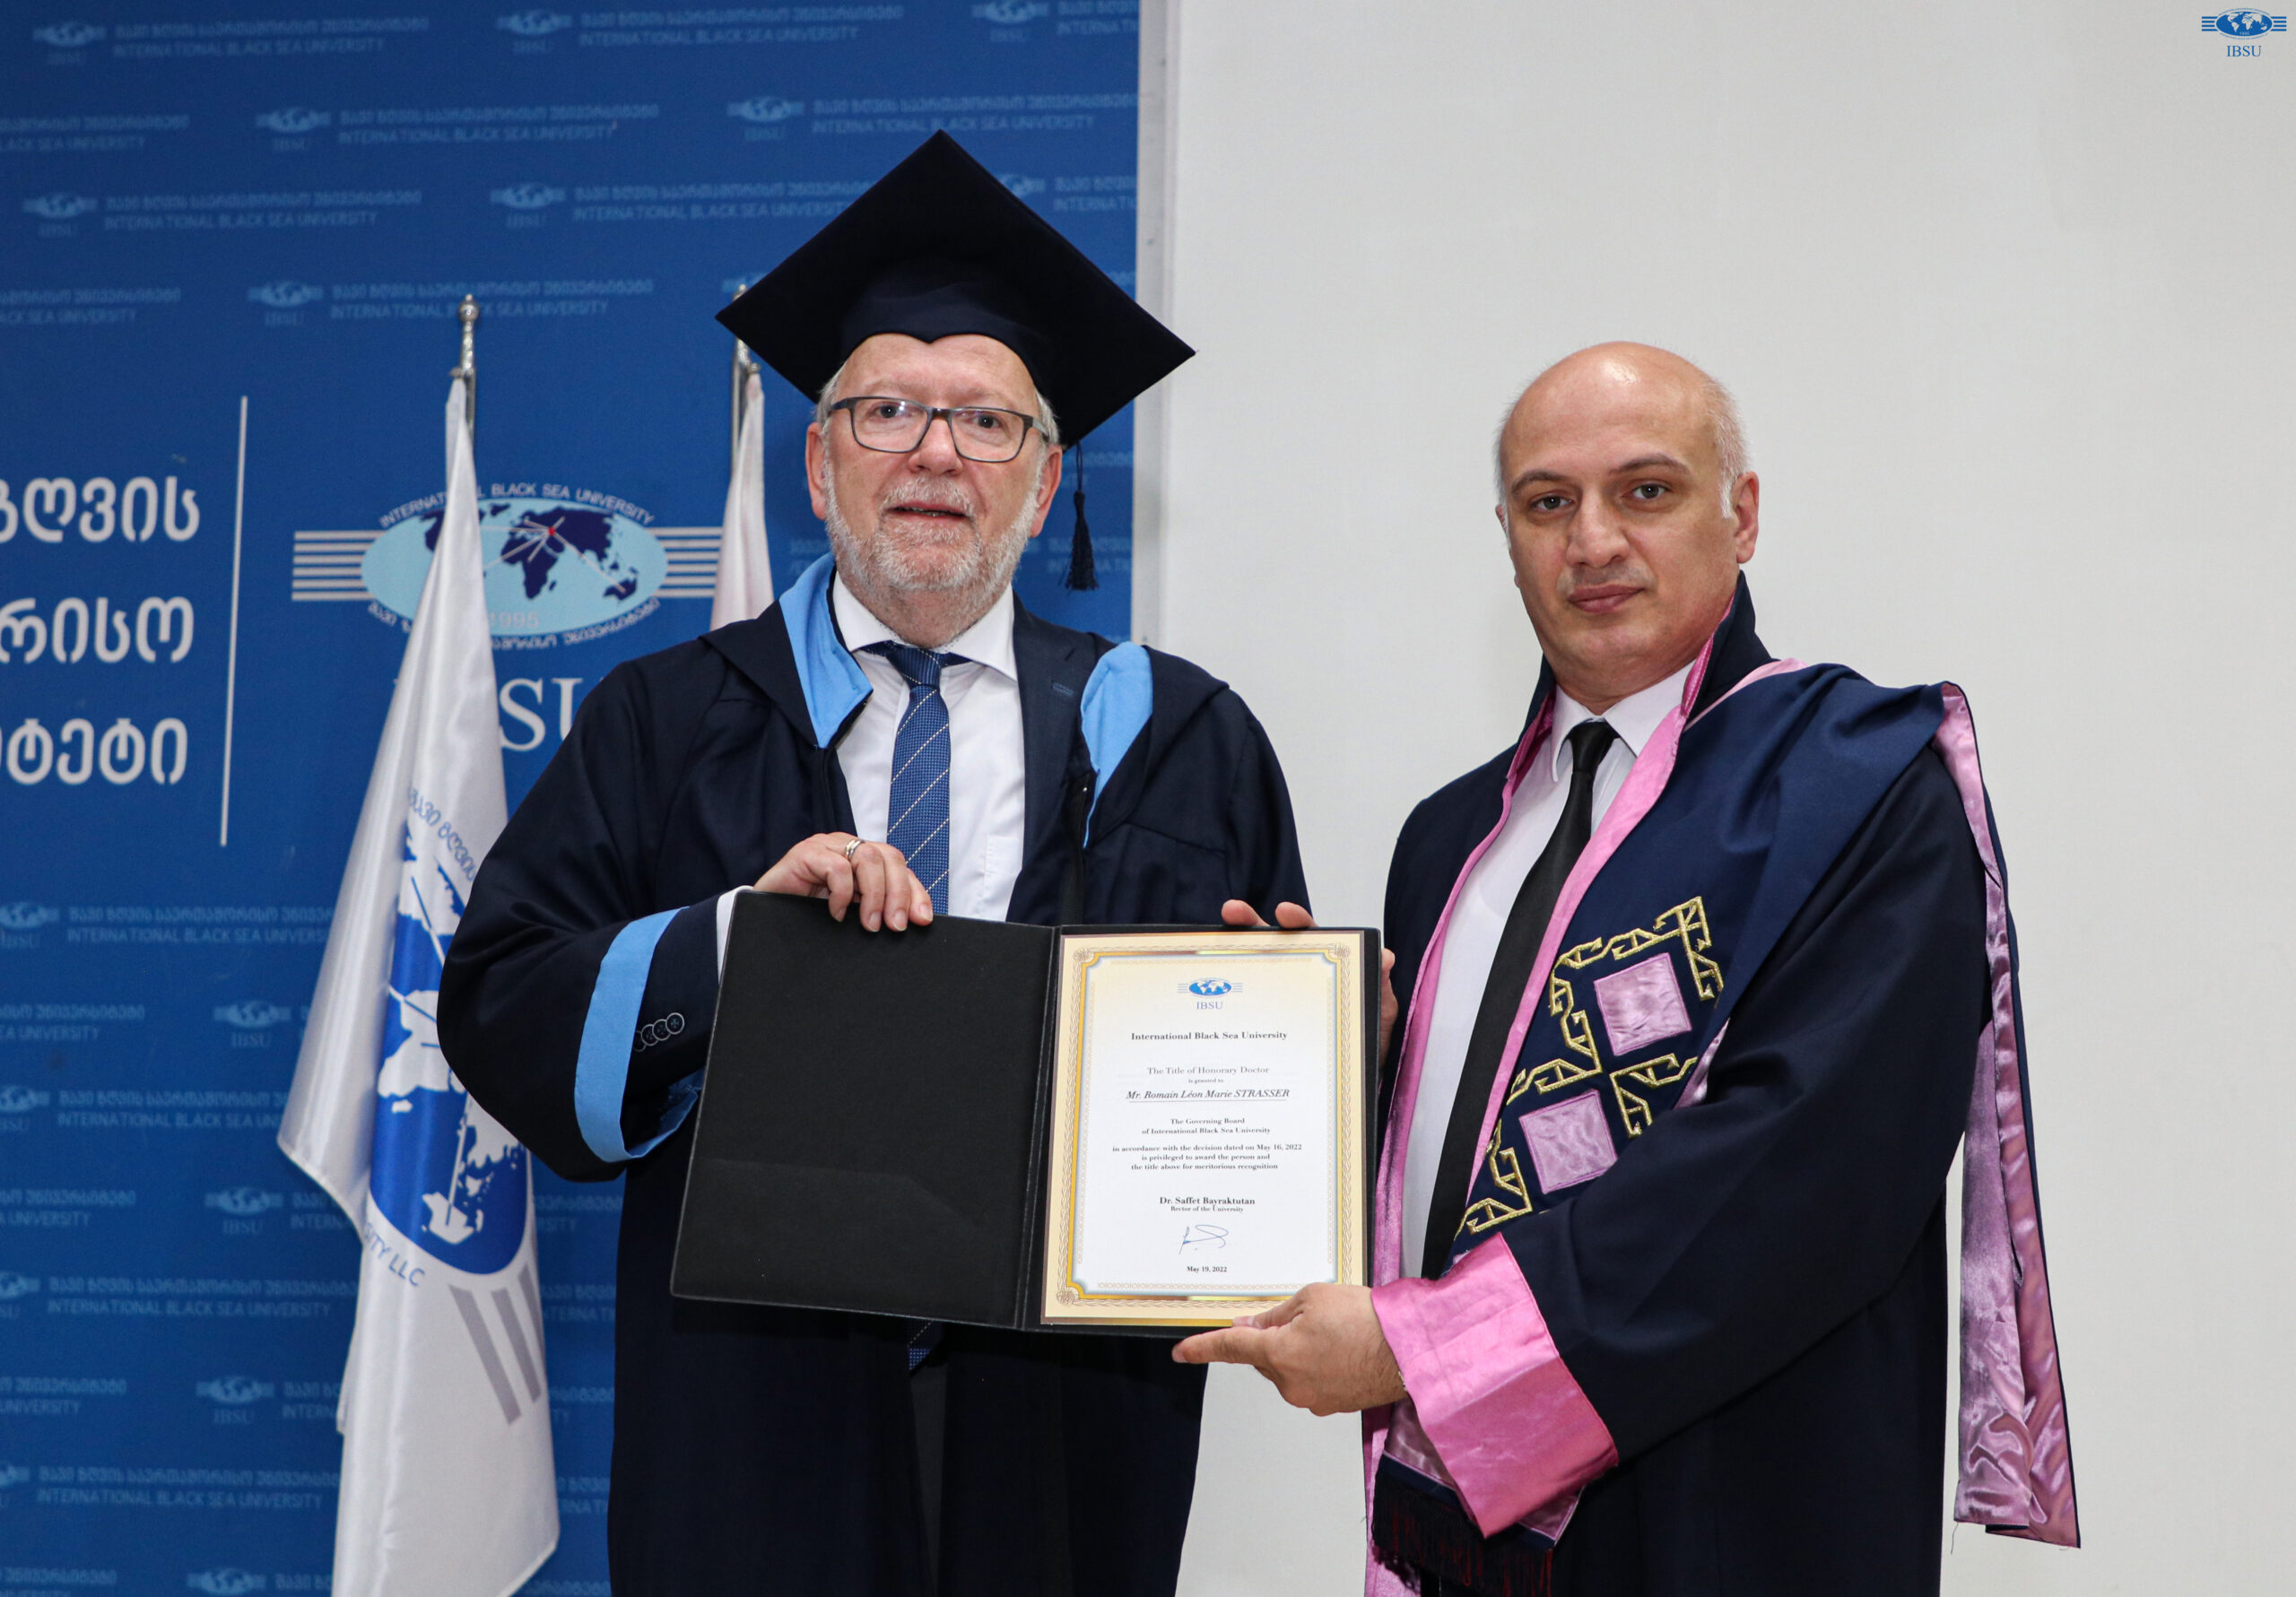 Roman Strass was awarded an honorary doctorate by the International Black Sea University